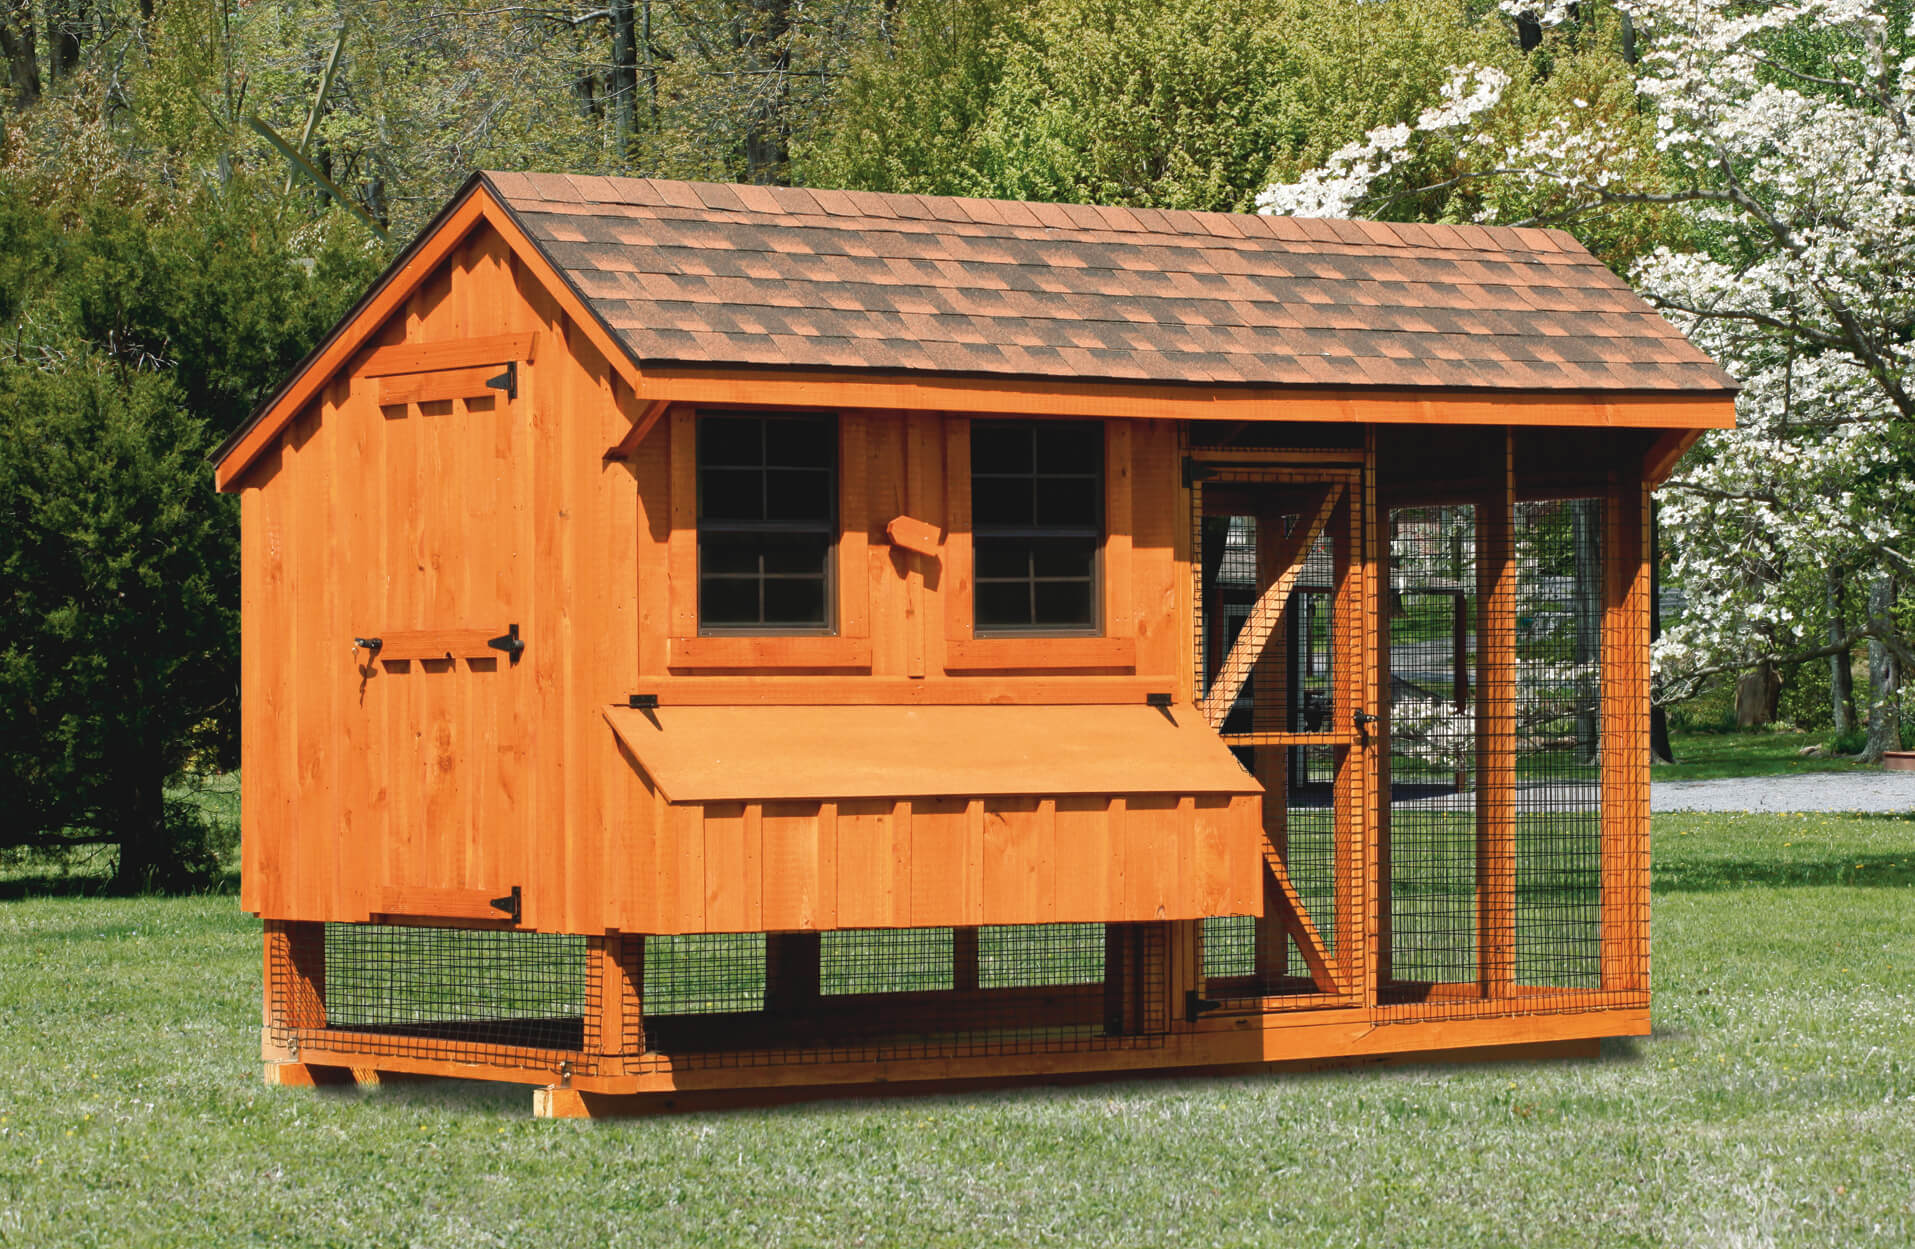 Exterior of a 6x12 Quaker Combination chicken coop